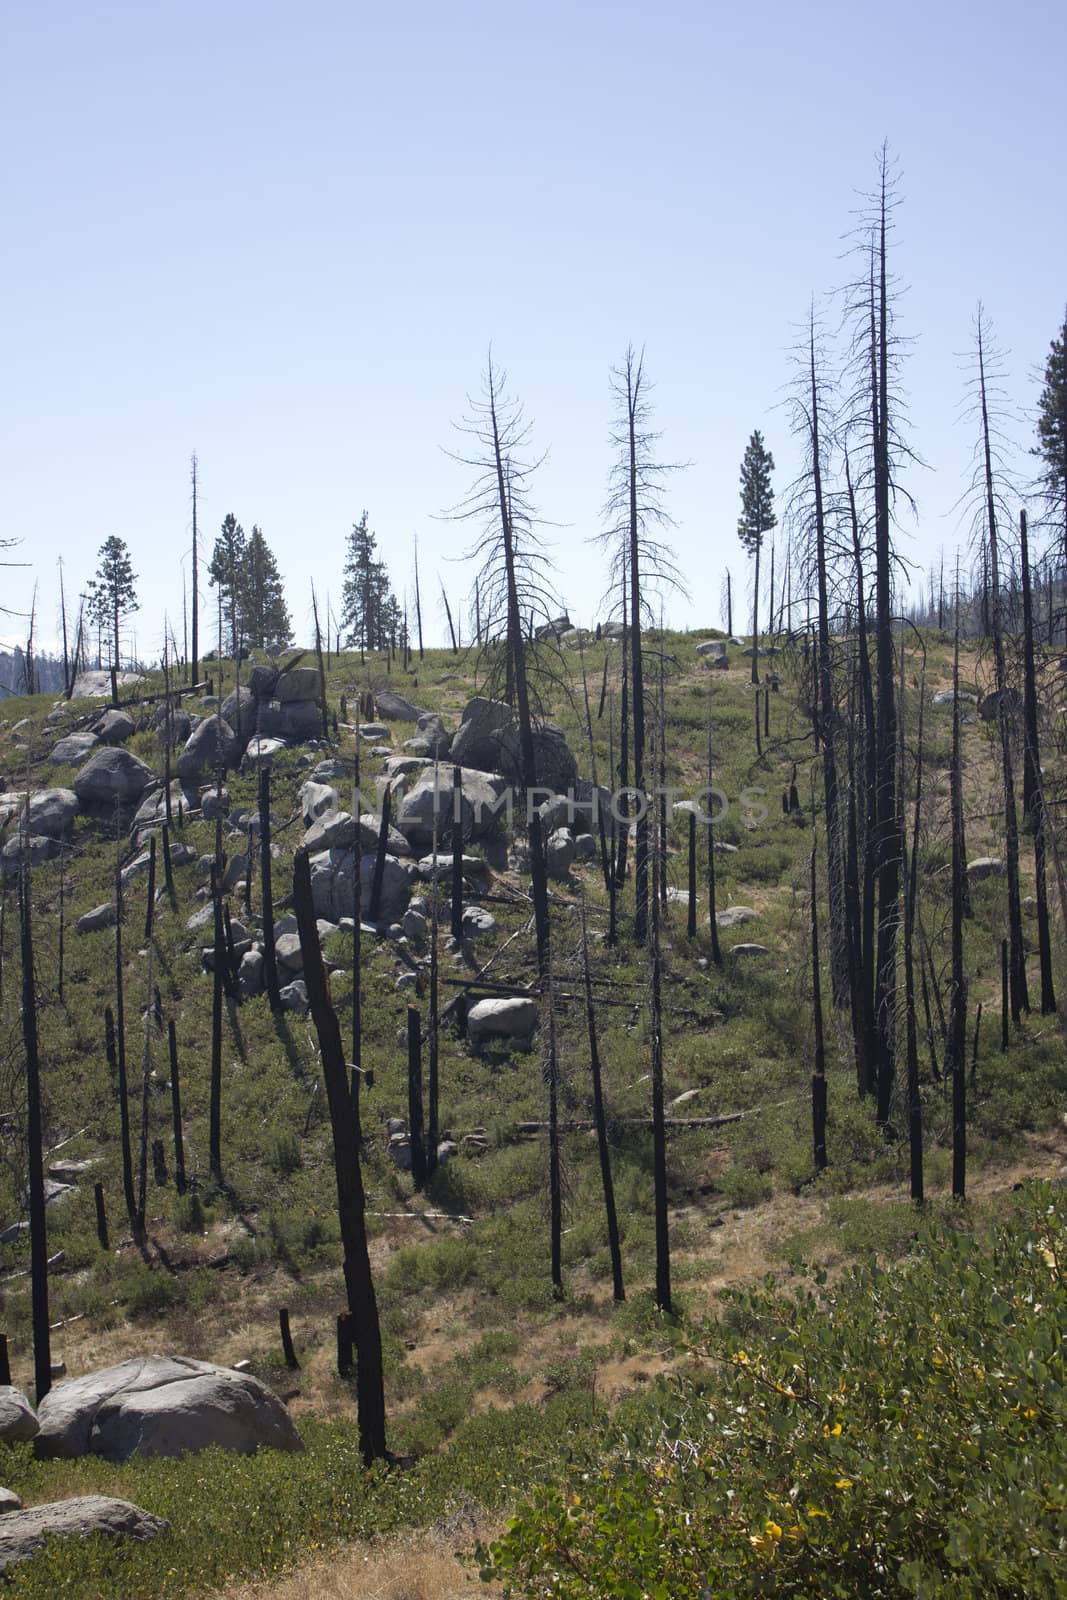 Burned trees in the forest by jeremywhat